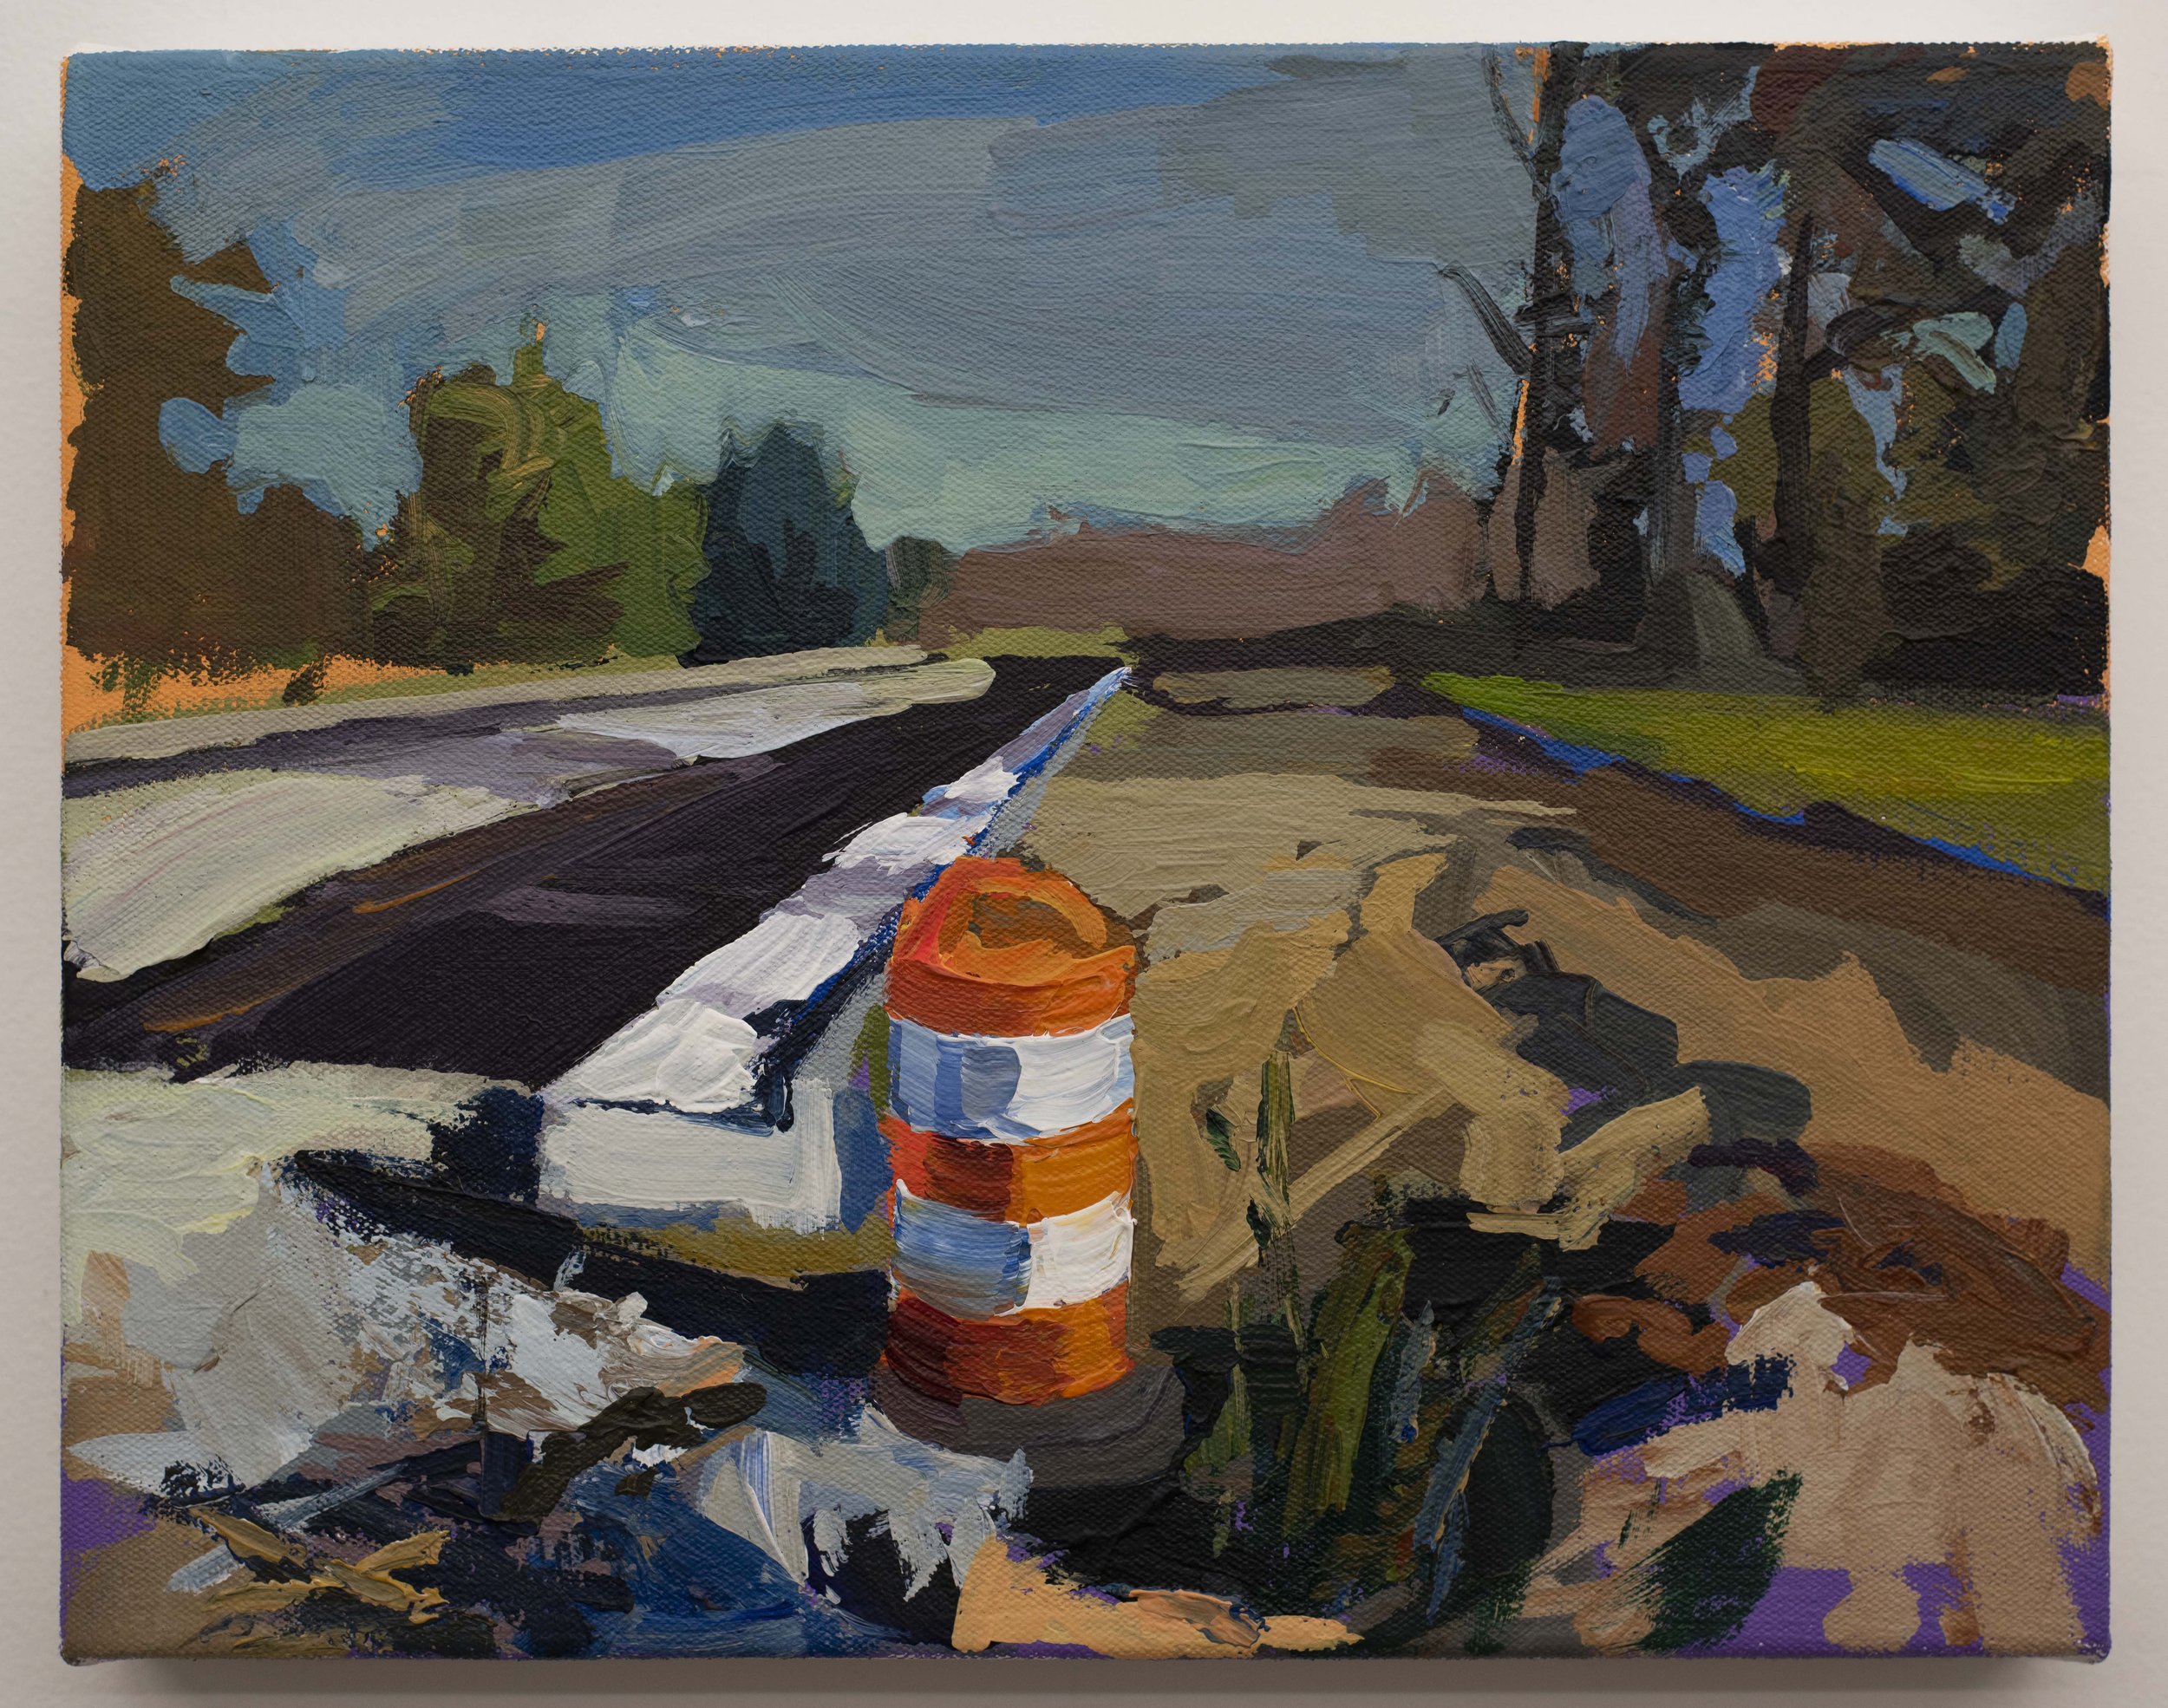  Construction Landscape #2, acrylic on canvas, 11 x 14 inches, 2021 